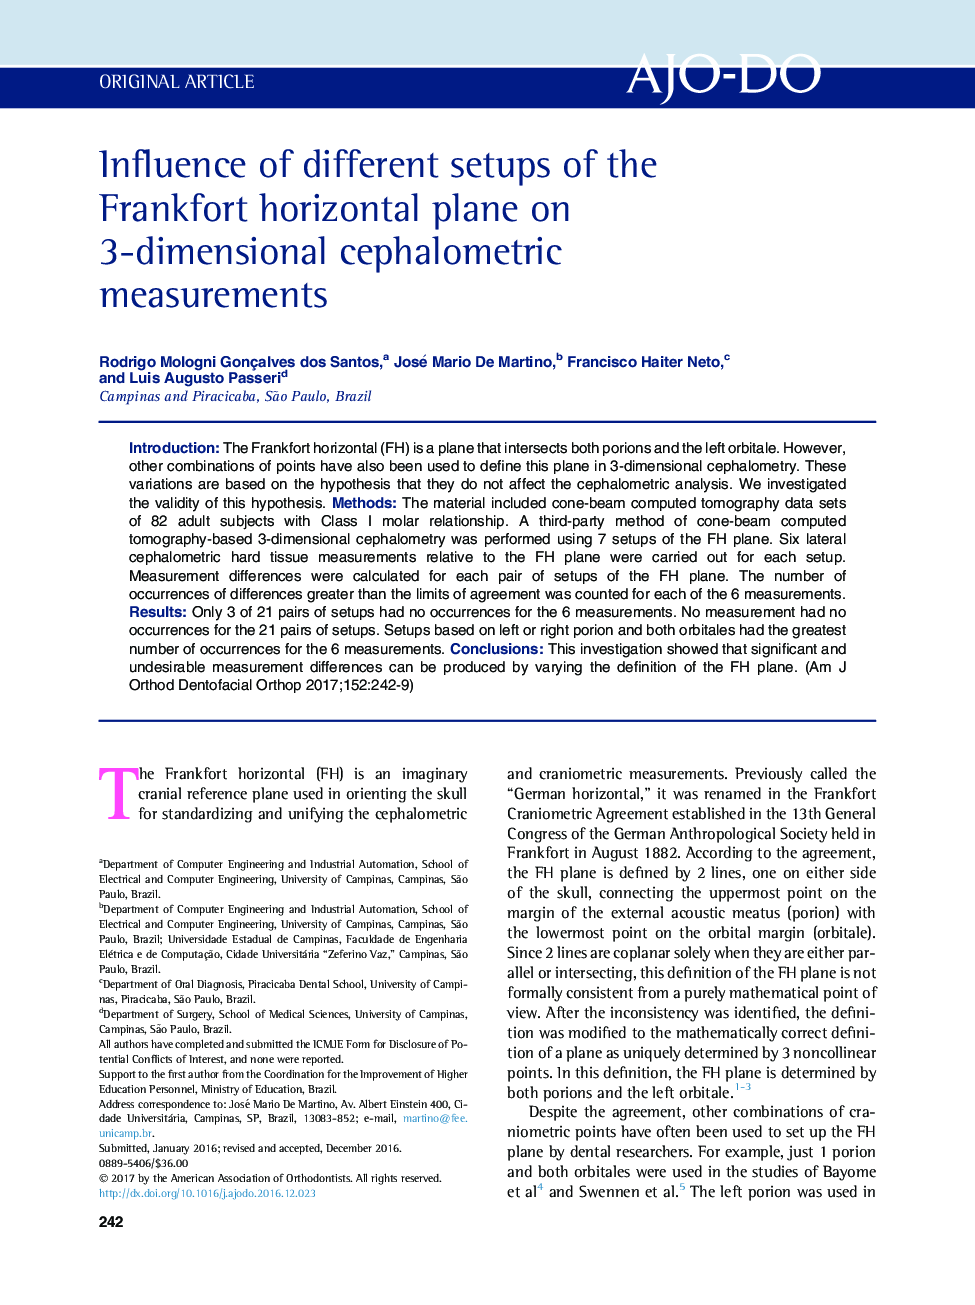 Influence of different setups of the Frankfort horizontal plane on 3-dimensional cephalometric measurements